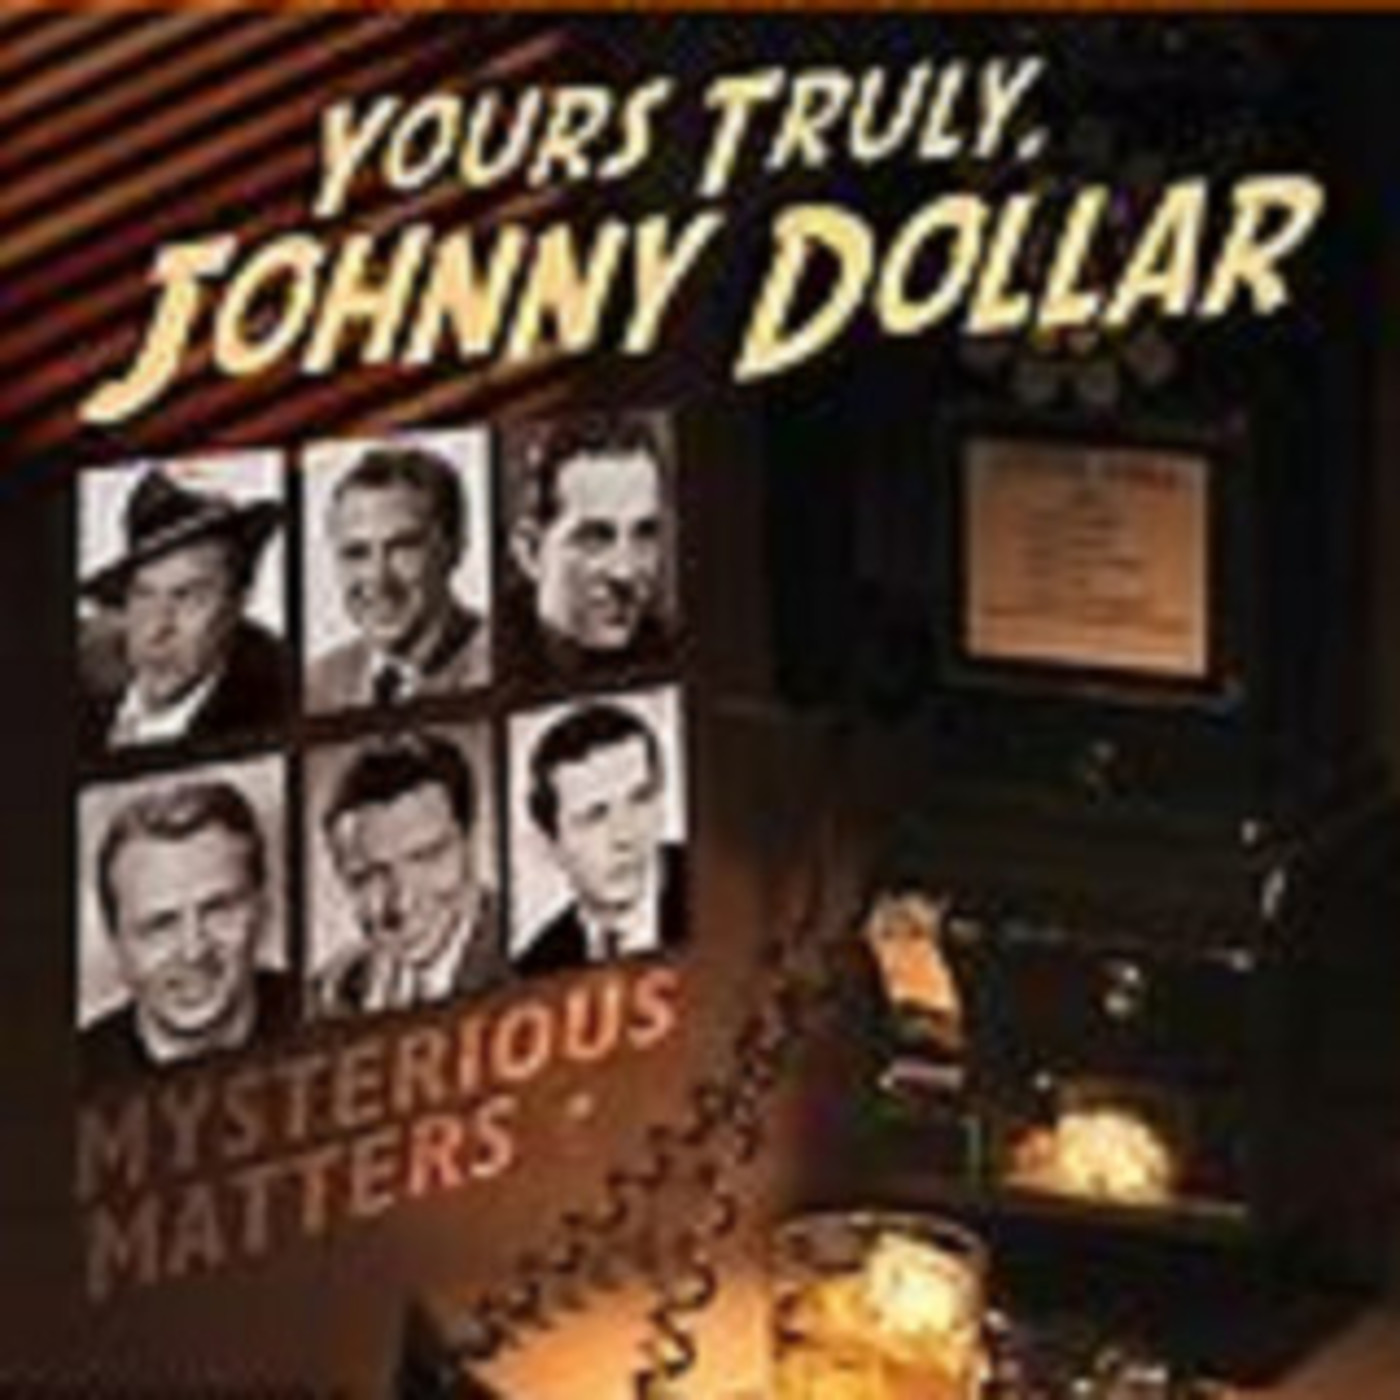 Yours Truly, Johnny Dollar - 082662, episode 806 - The Gold Rush Matter